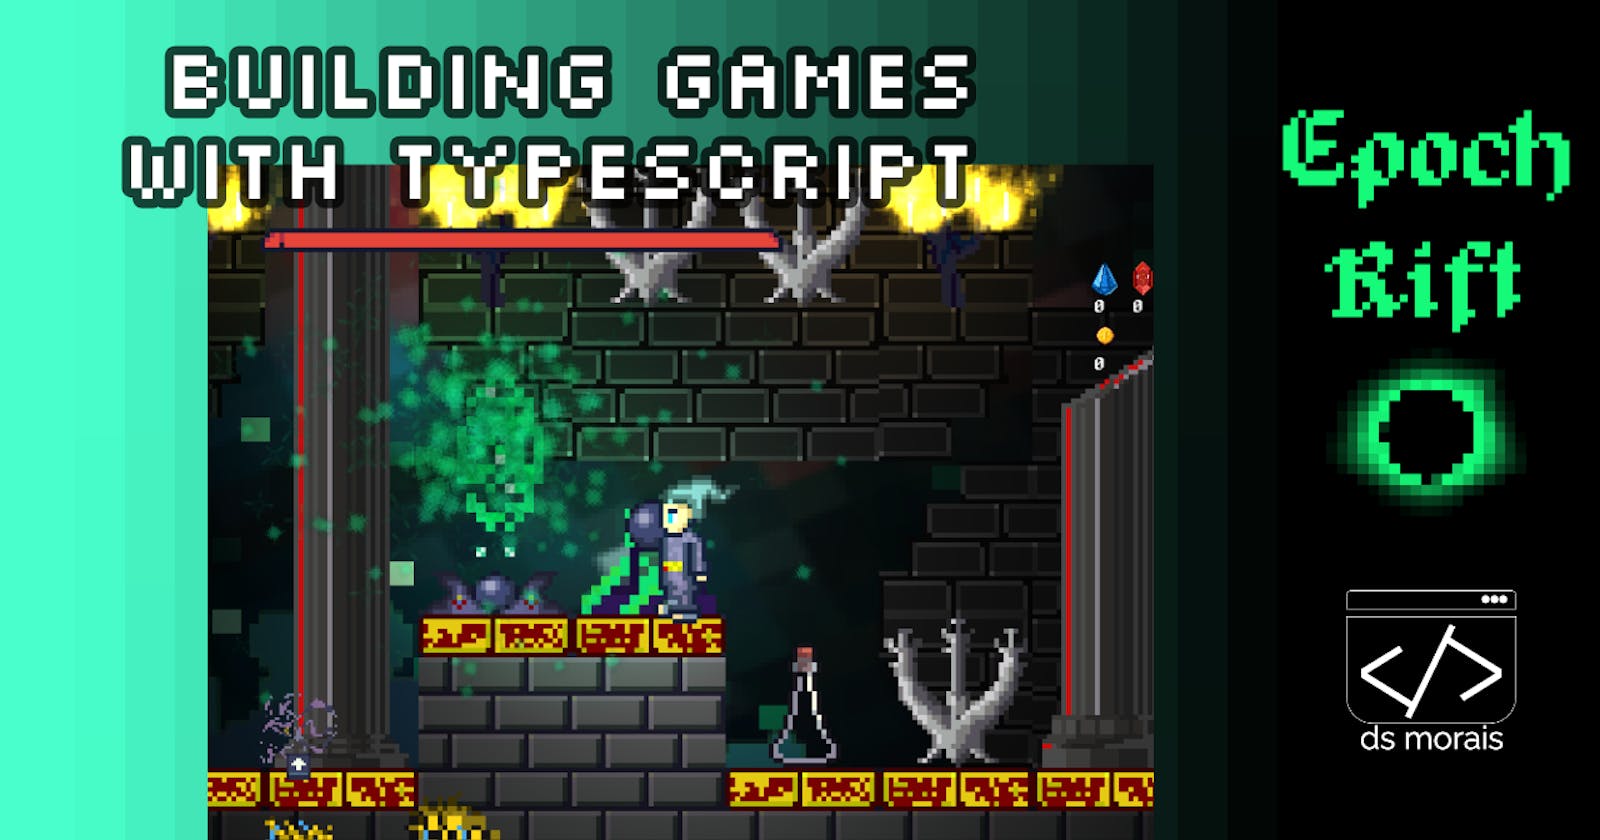 Building a Roguelike Game with Typescript